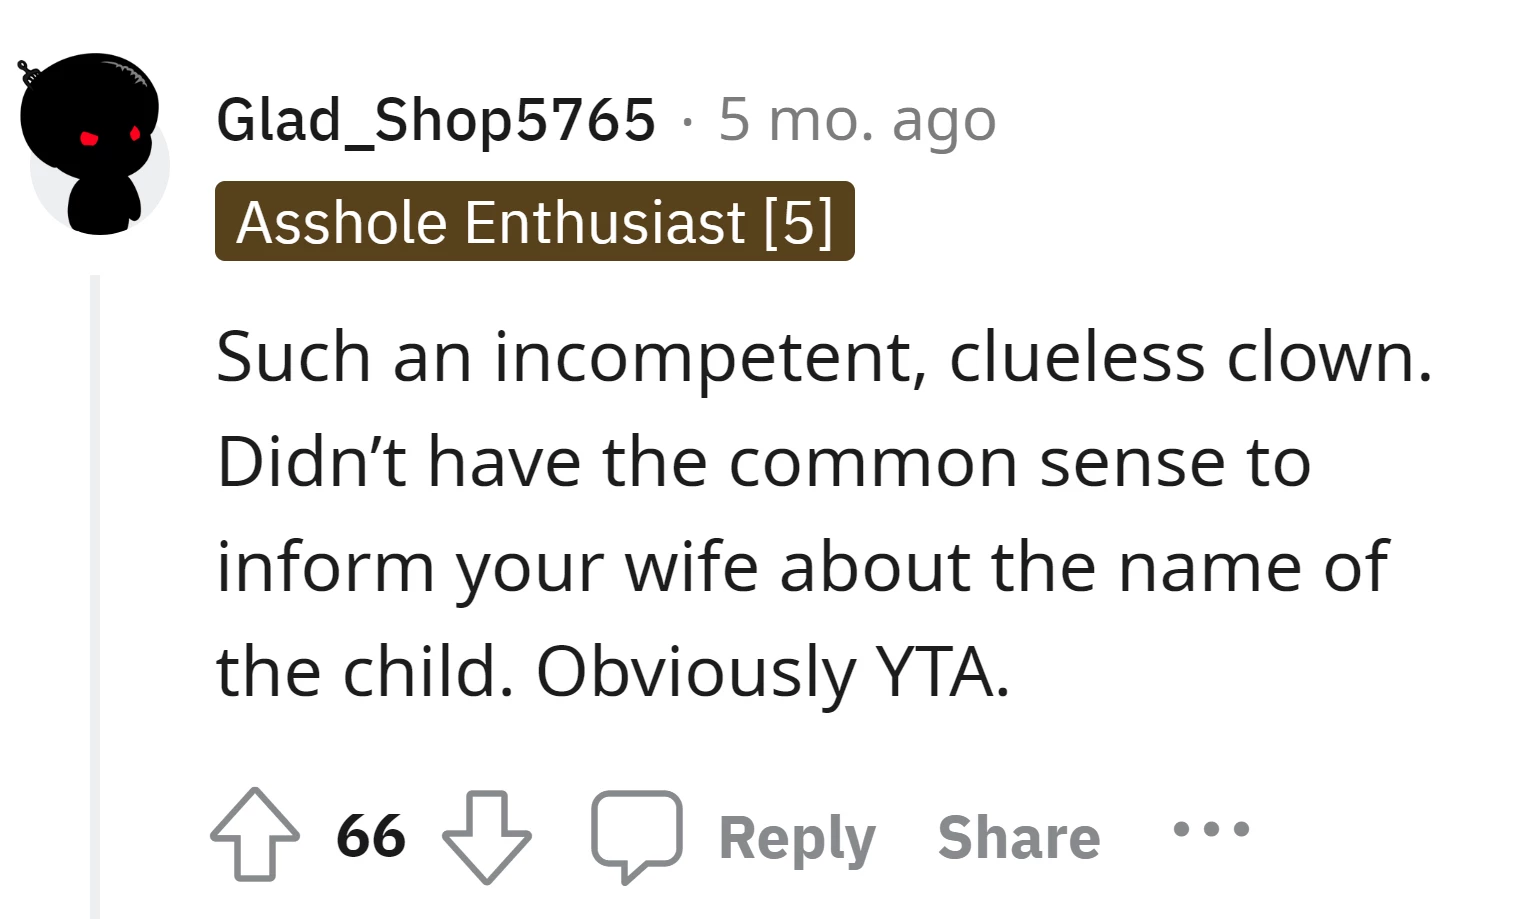 Commenter criticizes him as incompetent and clueless